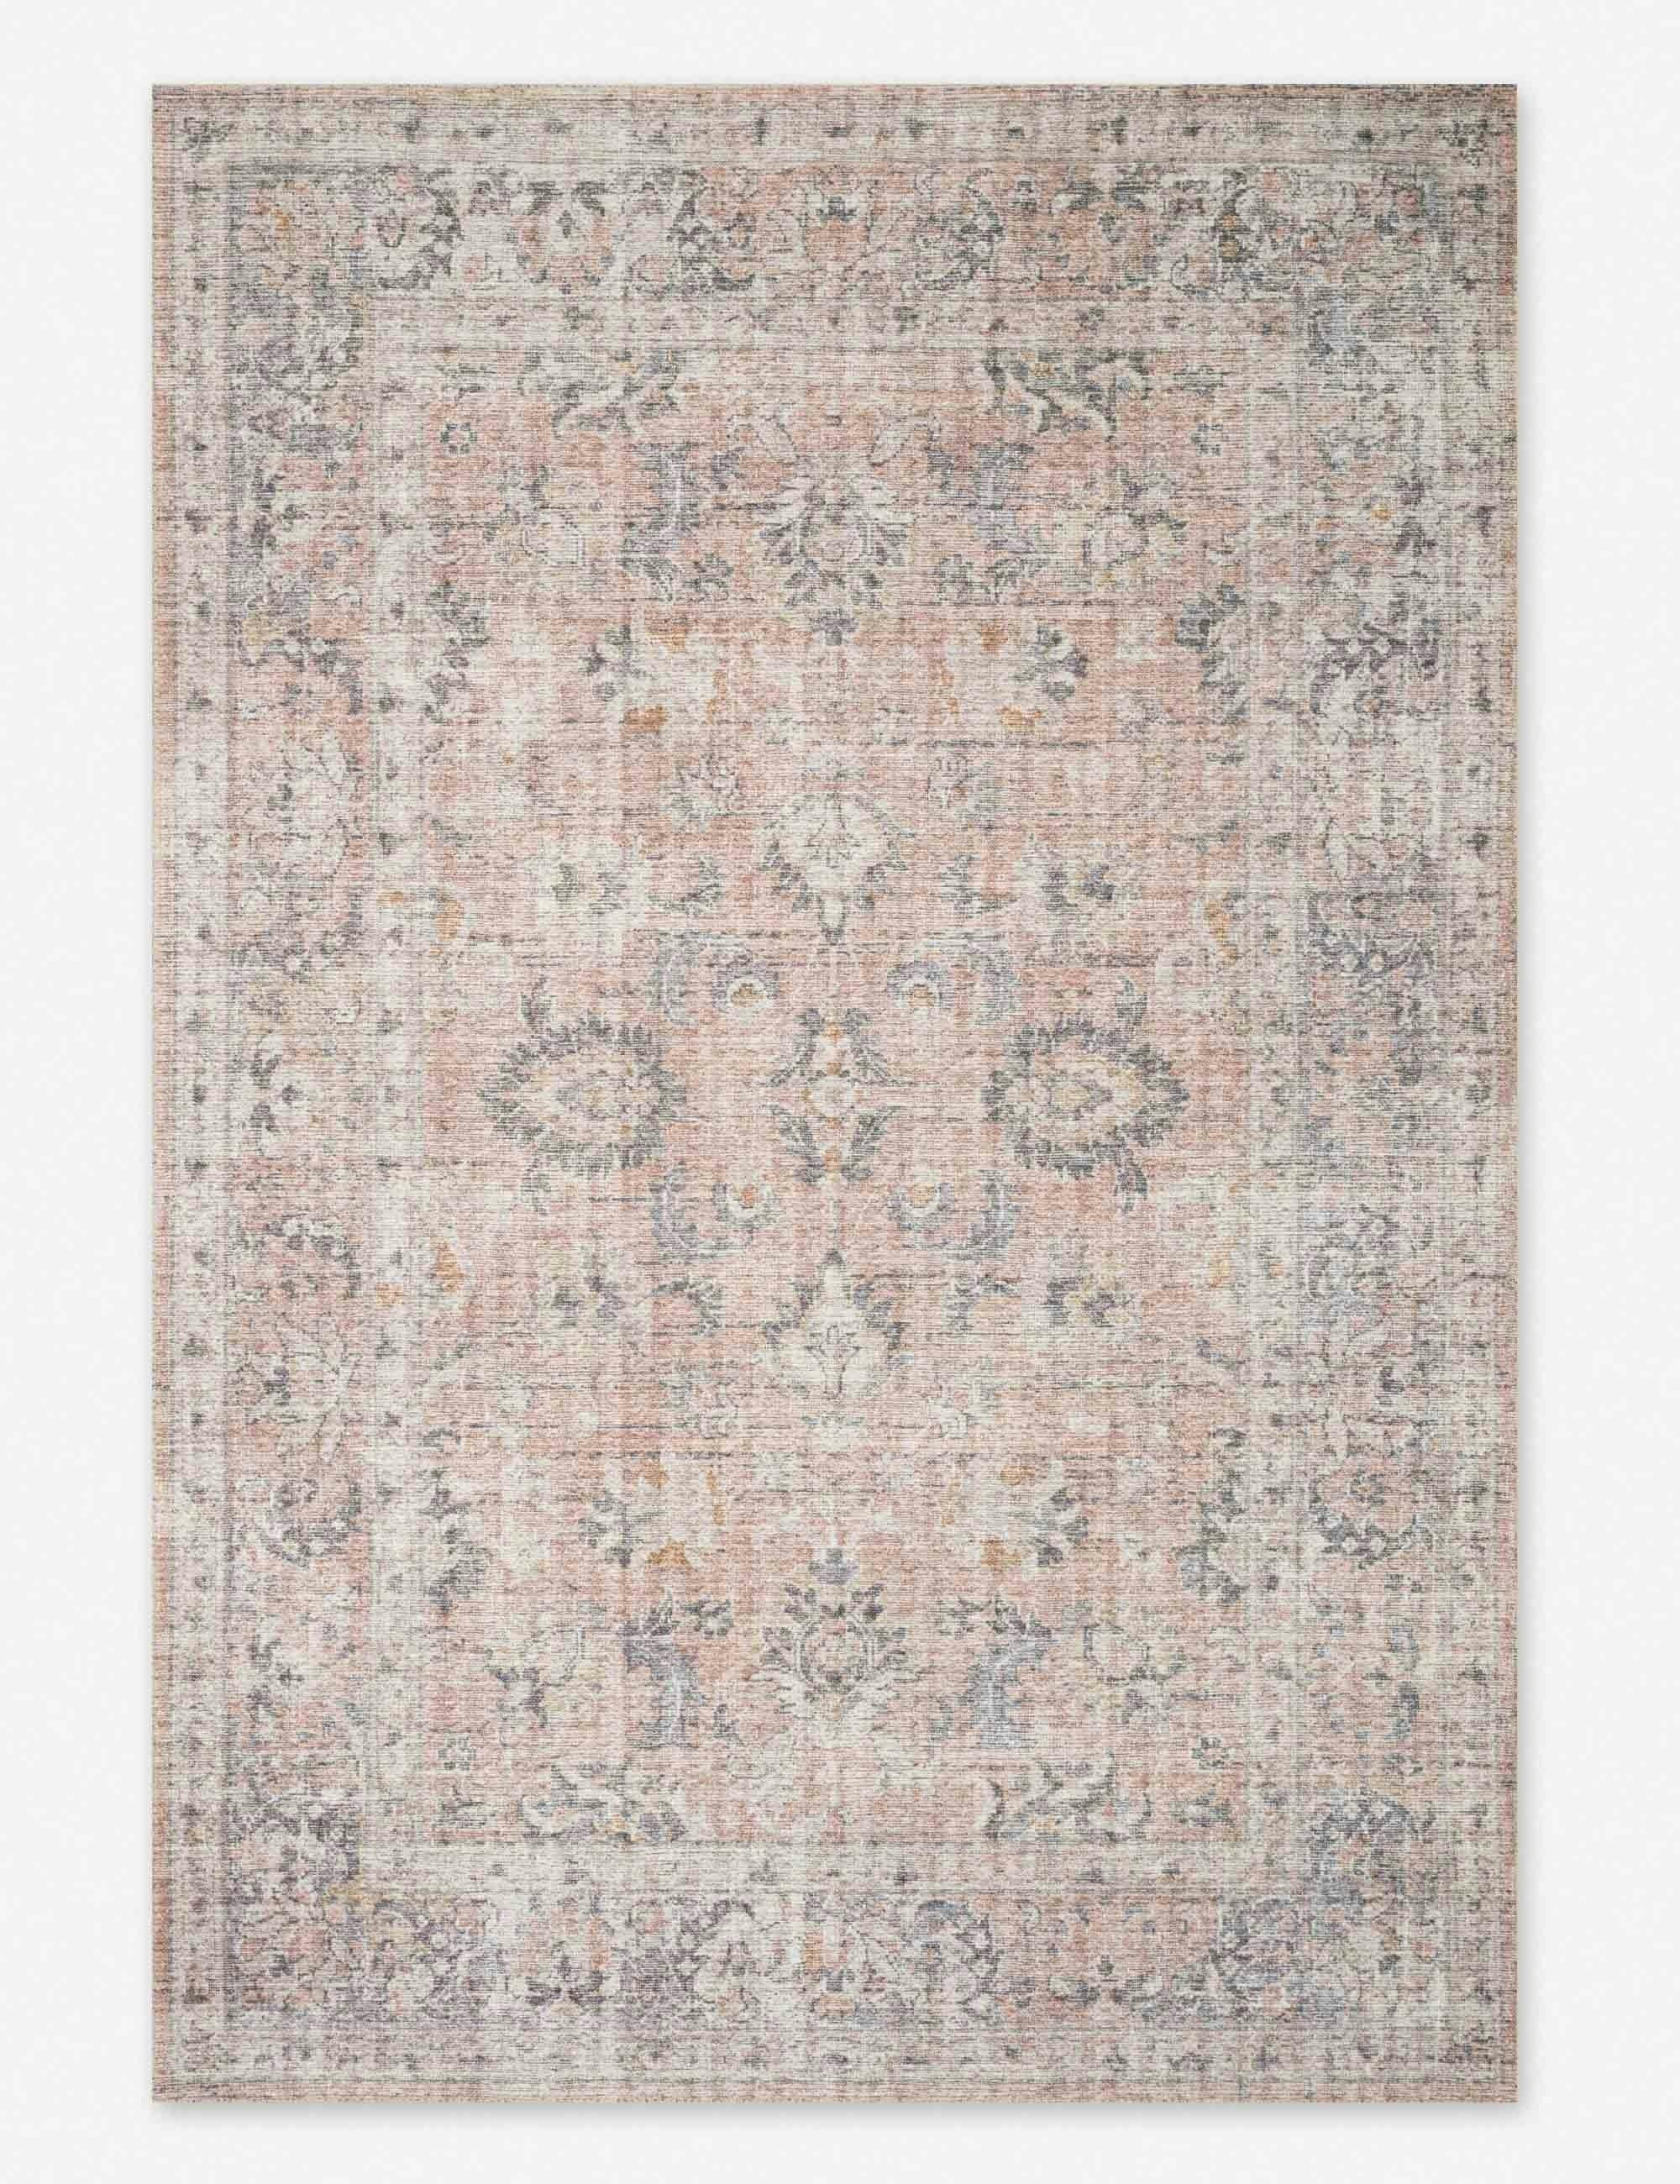 Elysian Blush and Grey 4' x 6' Wool-Synthetic Blend Area Rug